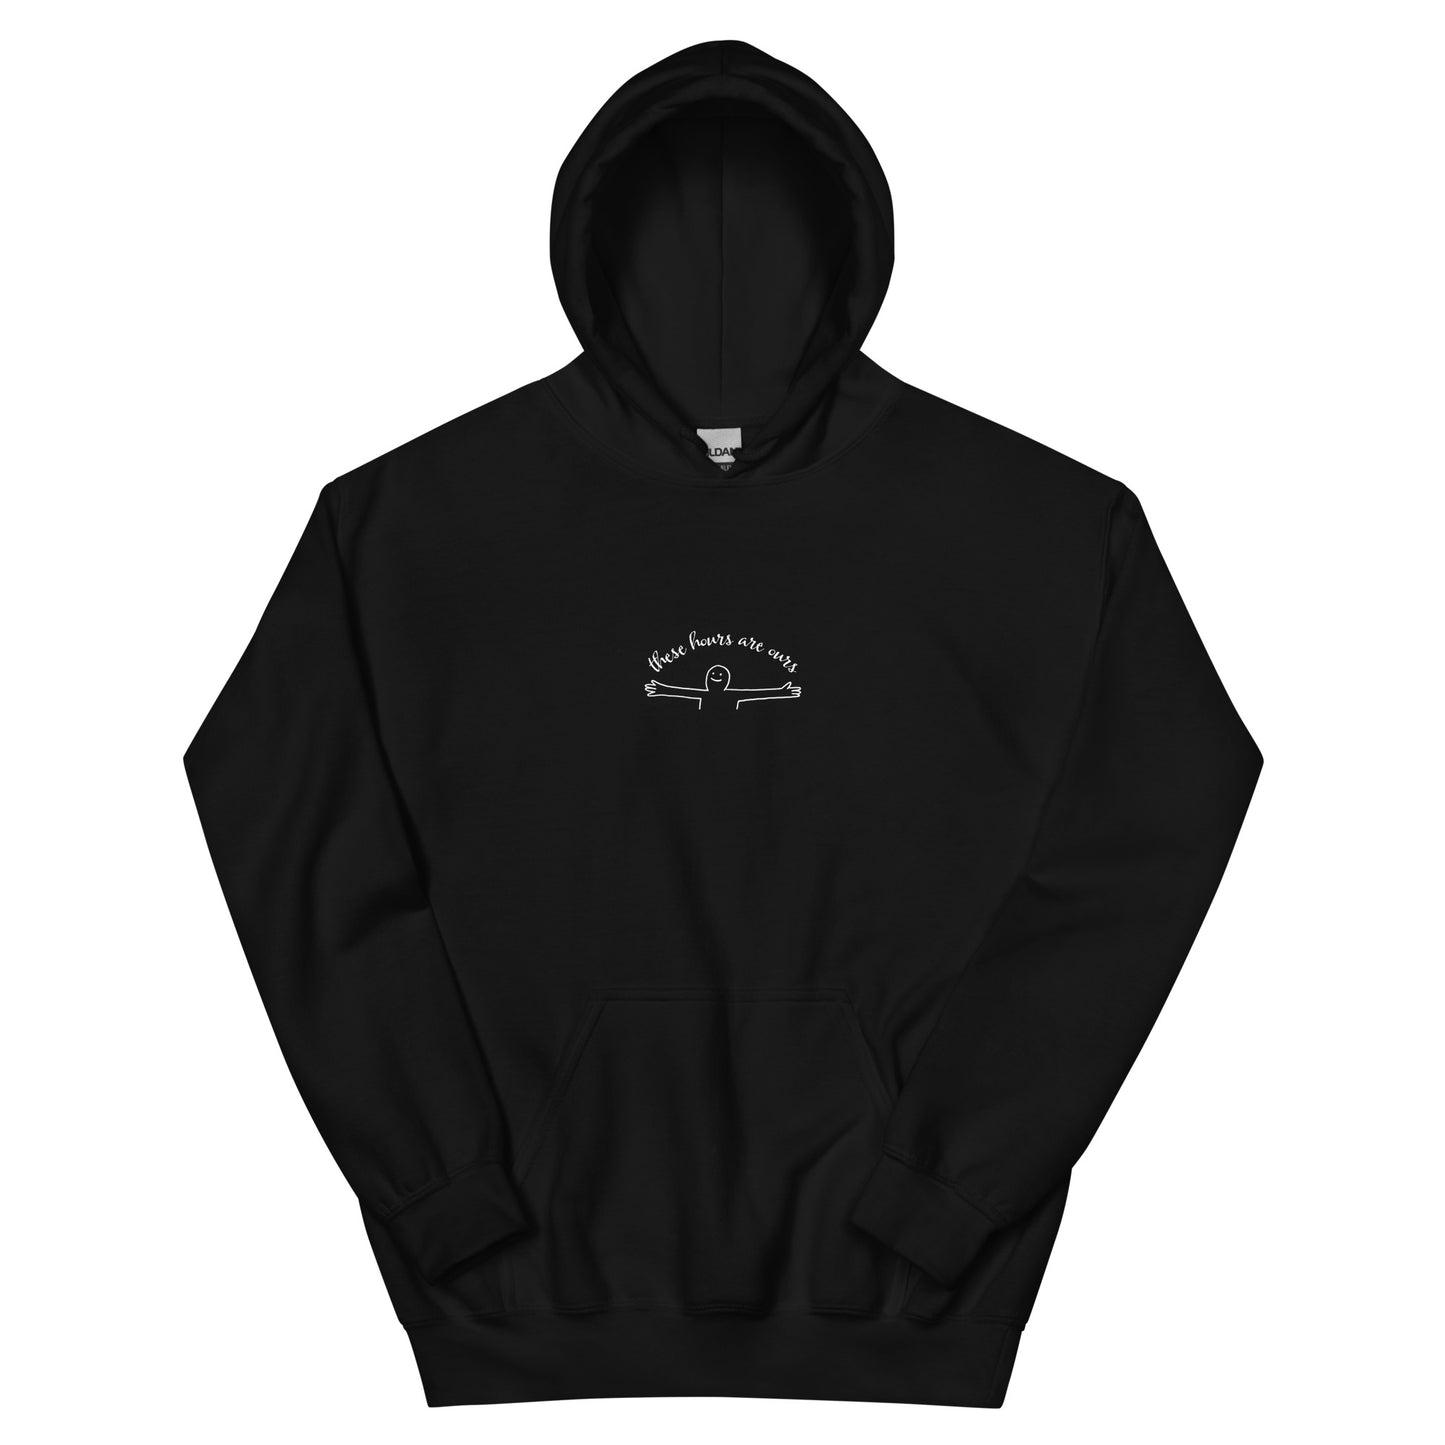 These Hours are Ours Hoody